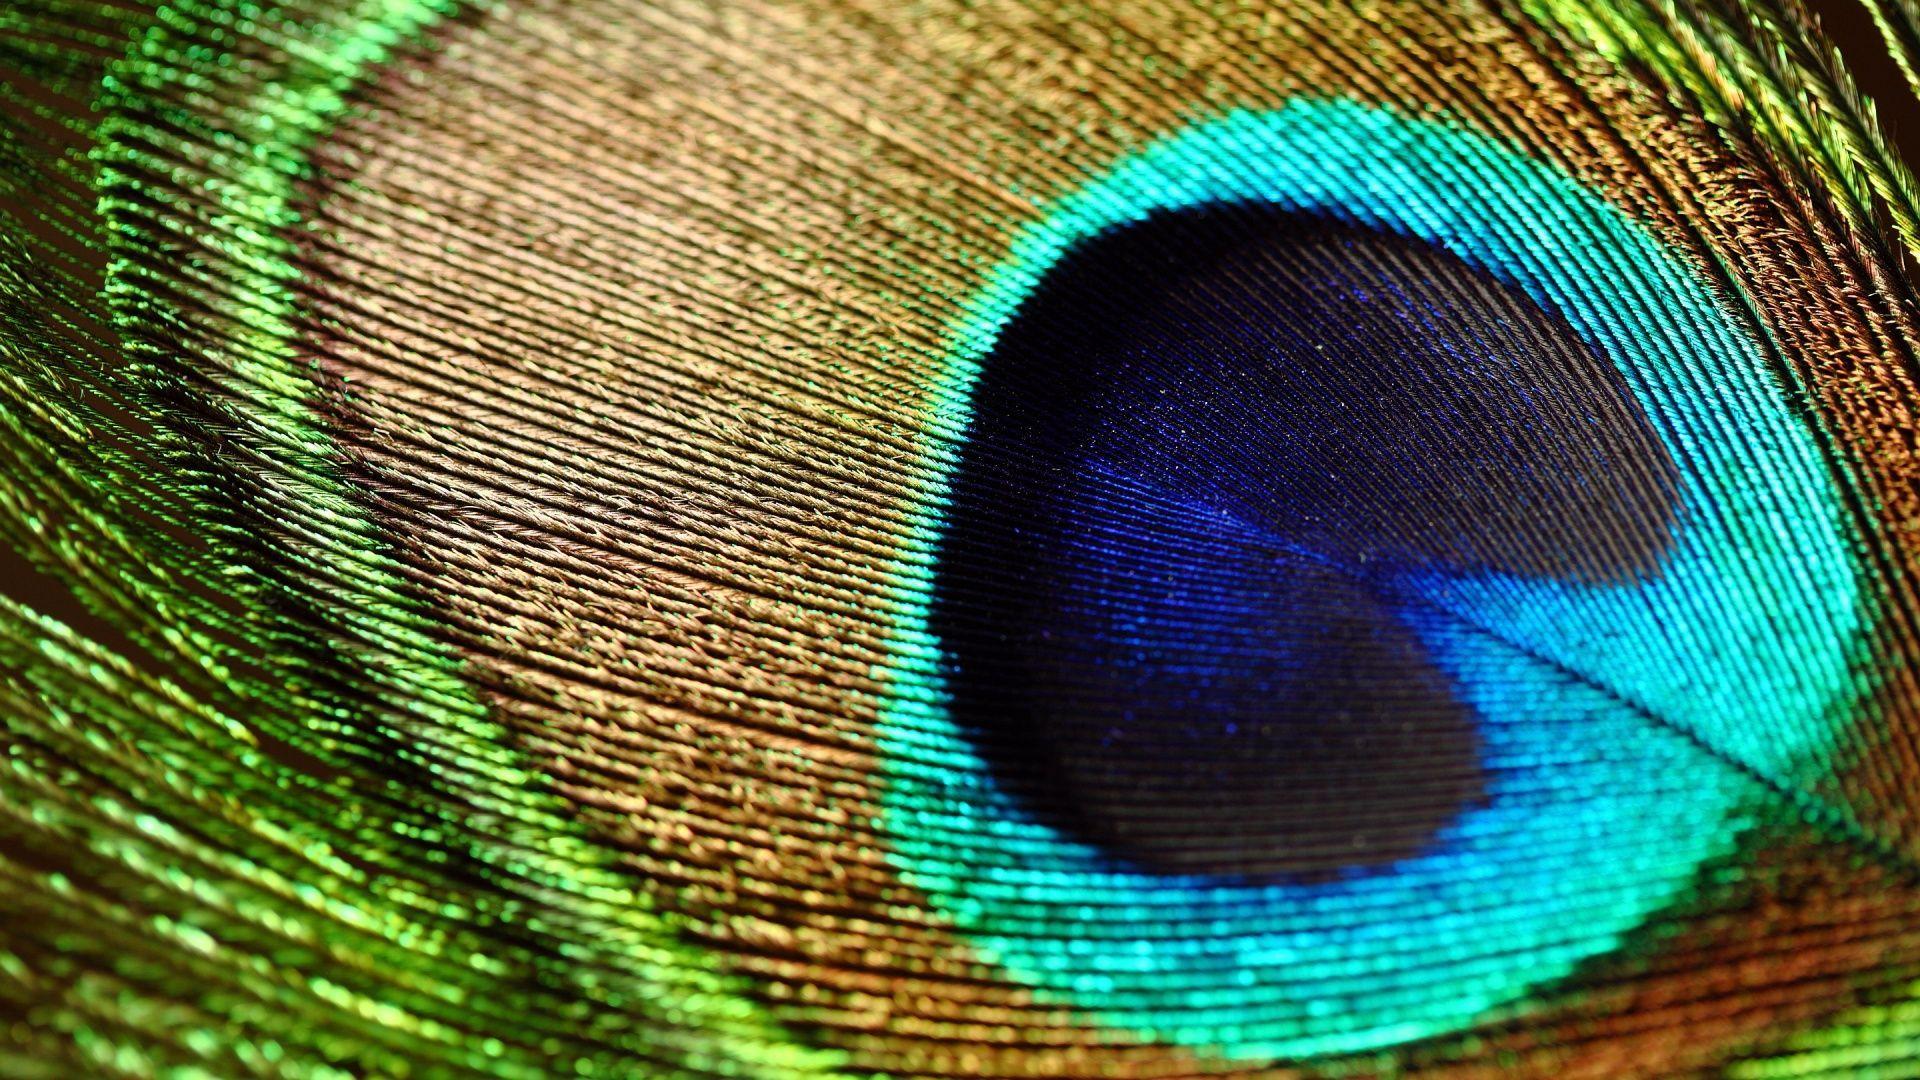 1920x1080 Wallpaper Of Peacock Feathers HD 2016